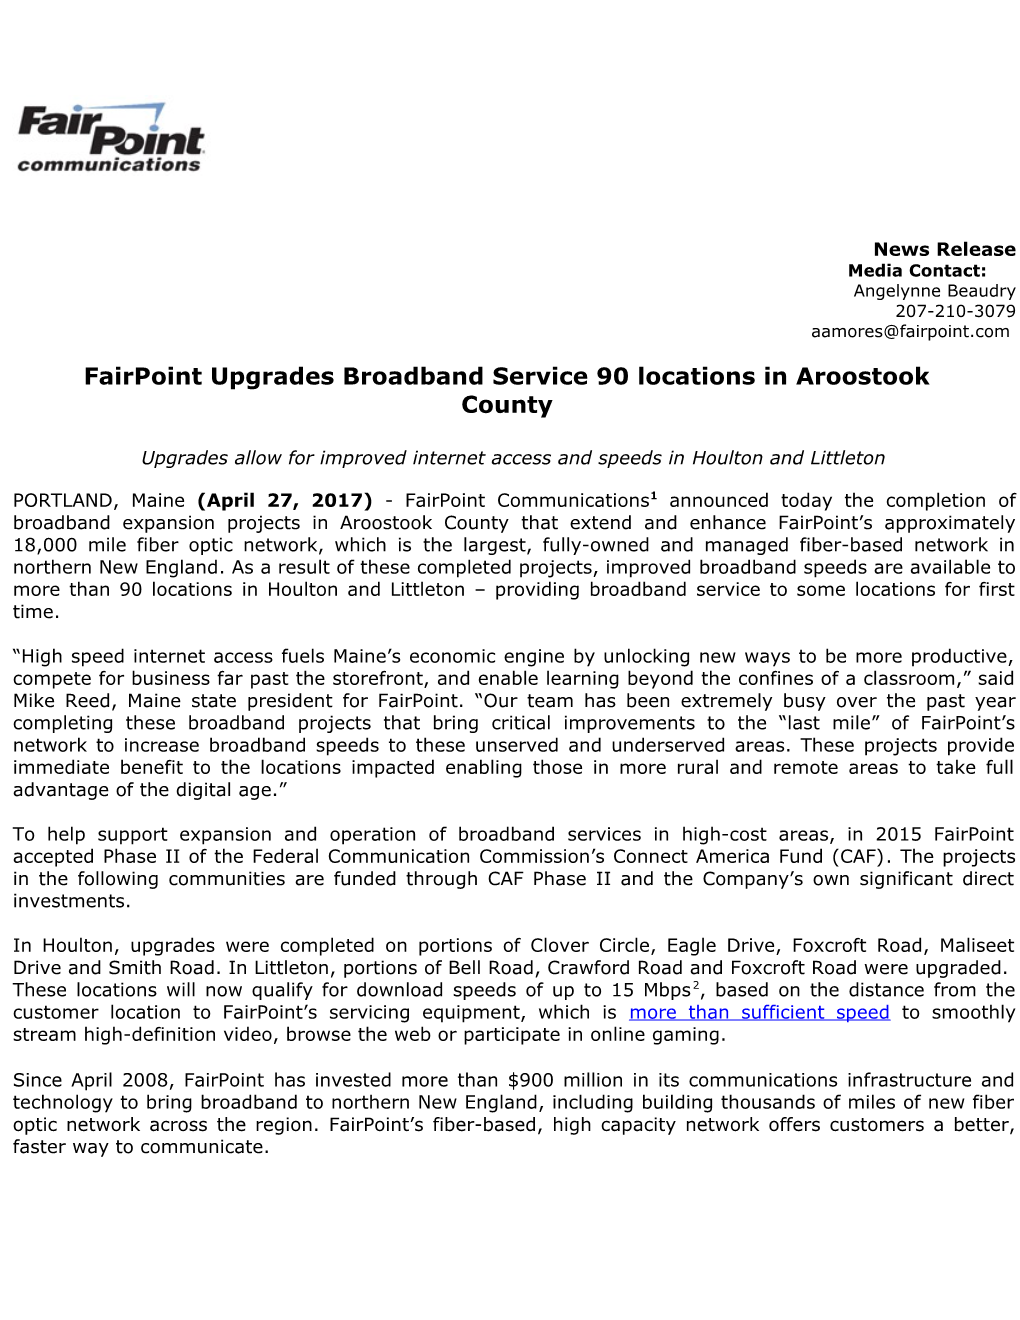 Fairpoint Upgrades Broadband Service 90 Locations in Aroostook County